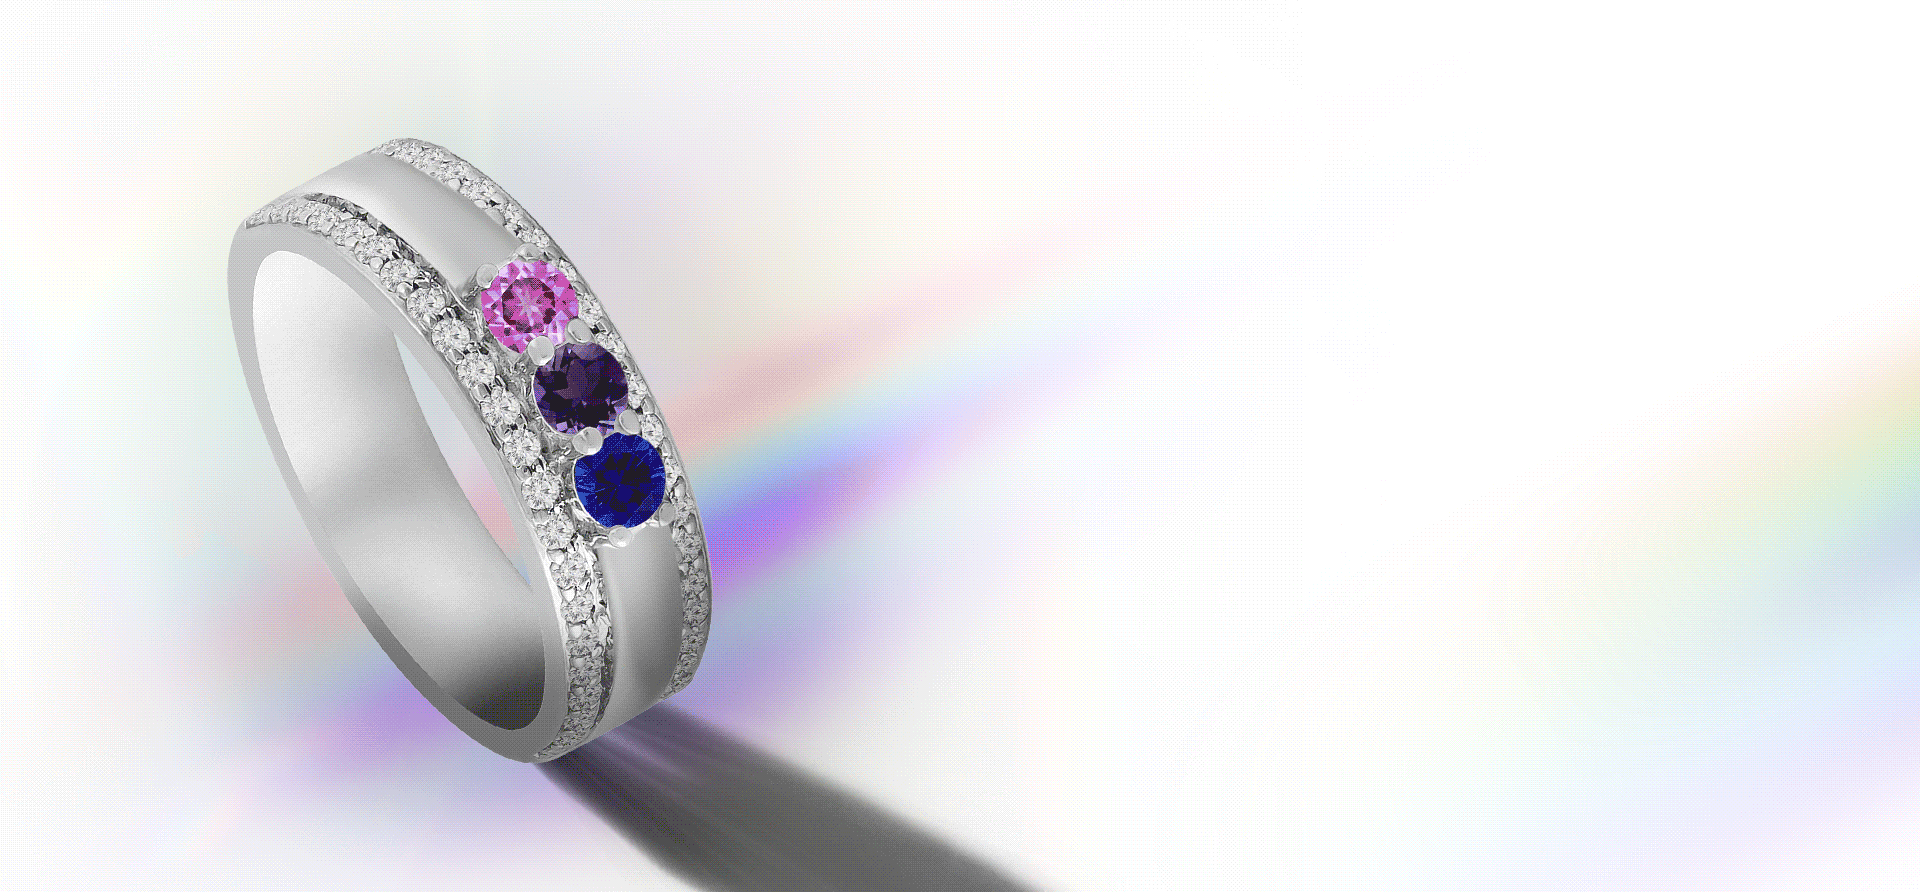 White gold band flashing gemstones in rainbow colors.